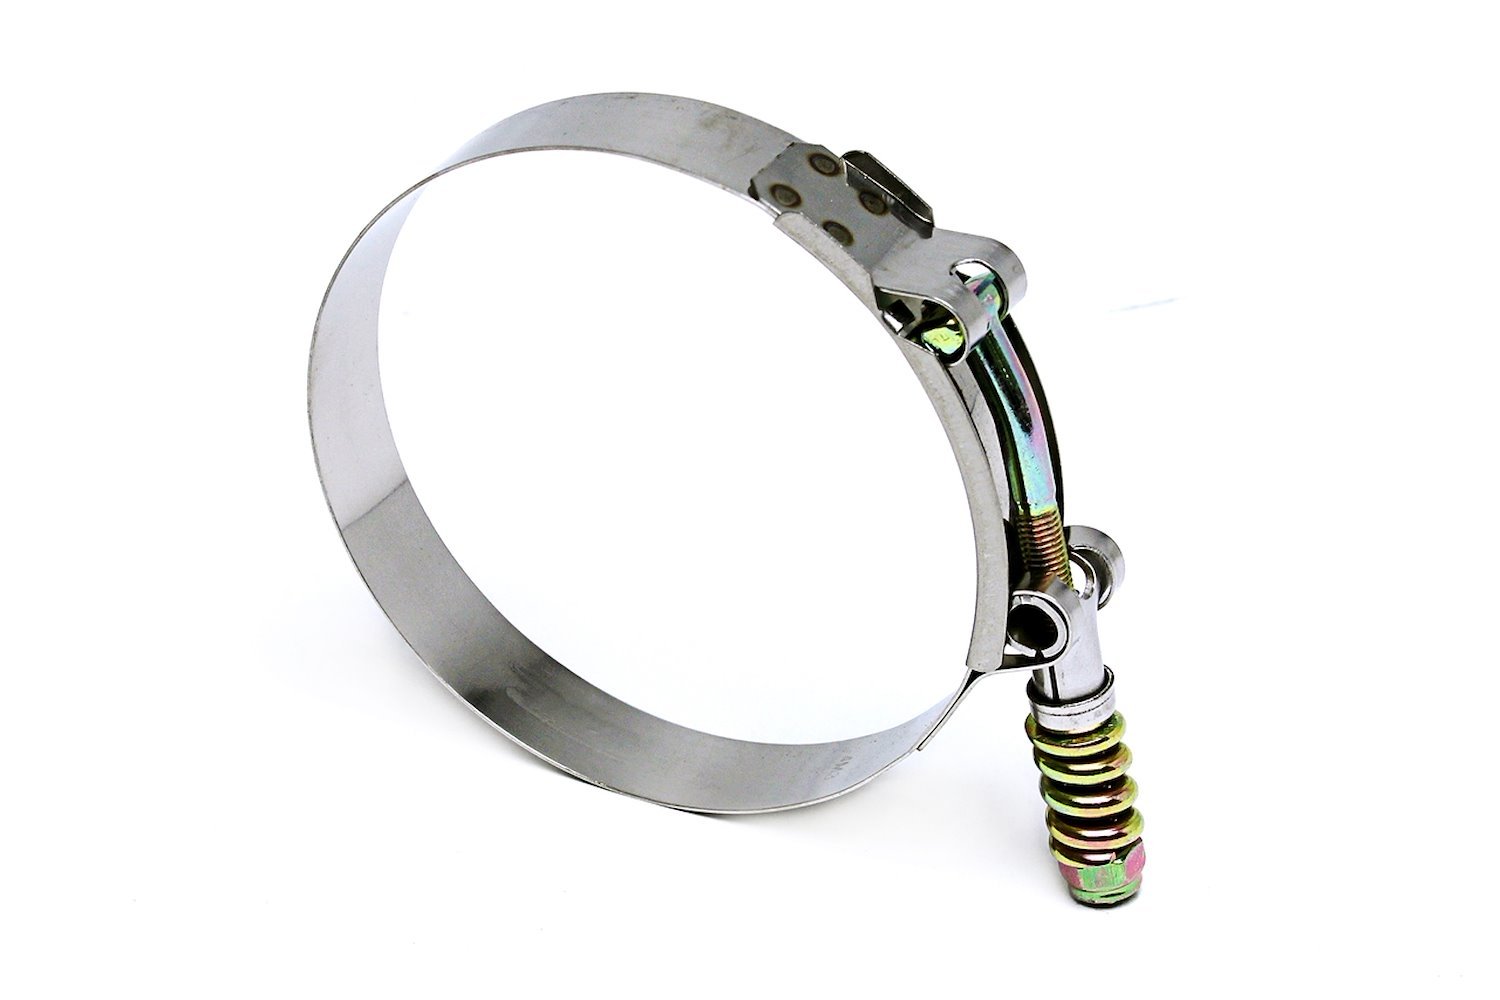 SLTC-525 Stainless Steel Spring Loaded T-Bolt Hose Clamp, Size #140, Range: 5.24 in.-5.55 in.